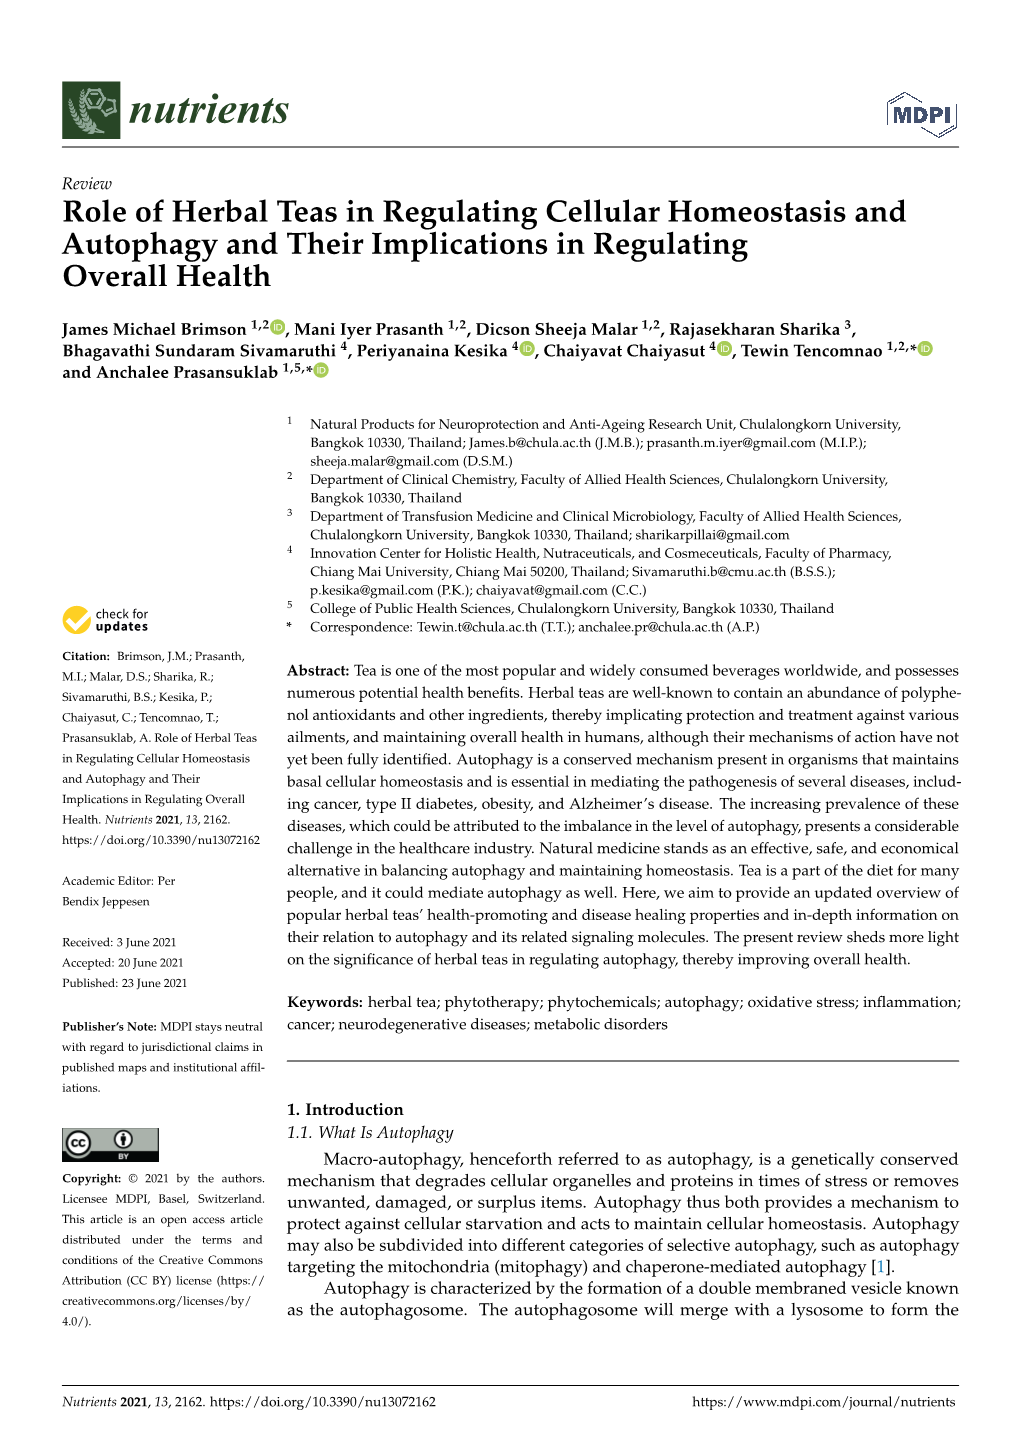 Role of Herbal Teas in Regulating Cellular Homeostasis and Autophagy and Their Implications in Regulating Overall Health